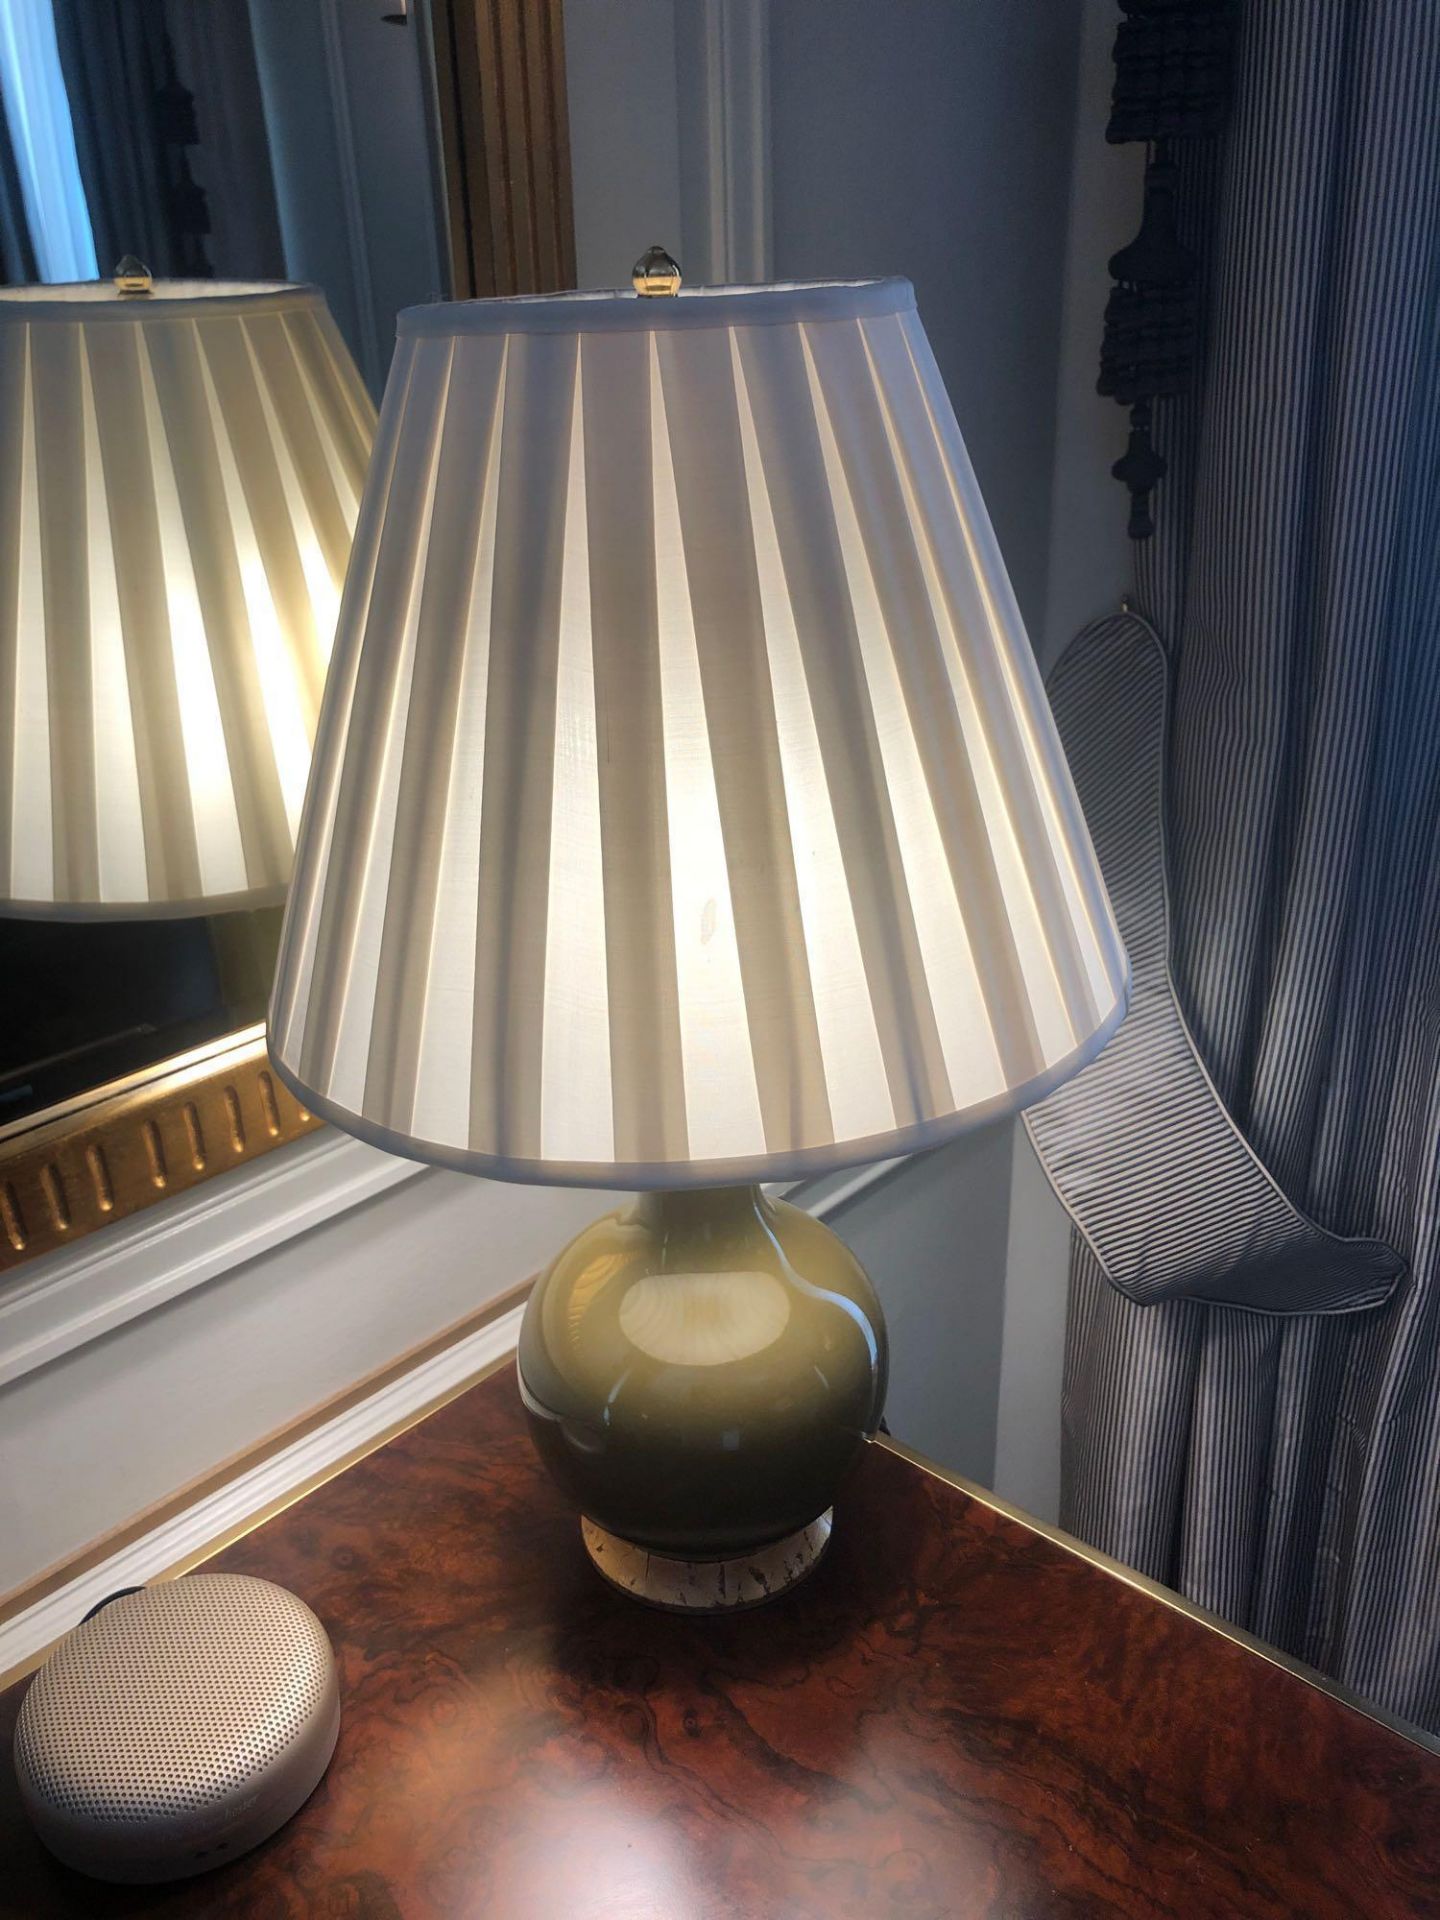 Heathfield And Co Gould Glazed Ceramic Table Lamp Twin Light With Cream Shade 58cm (Room 217/8)